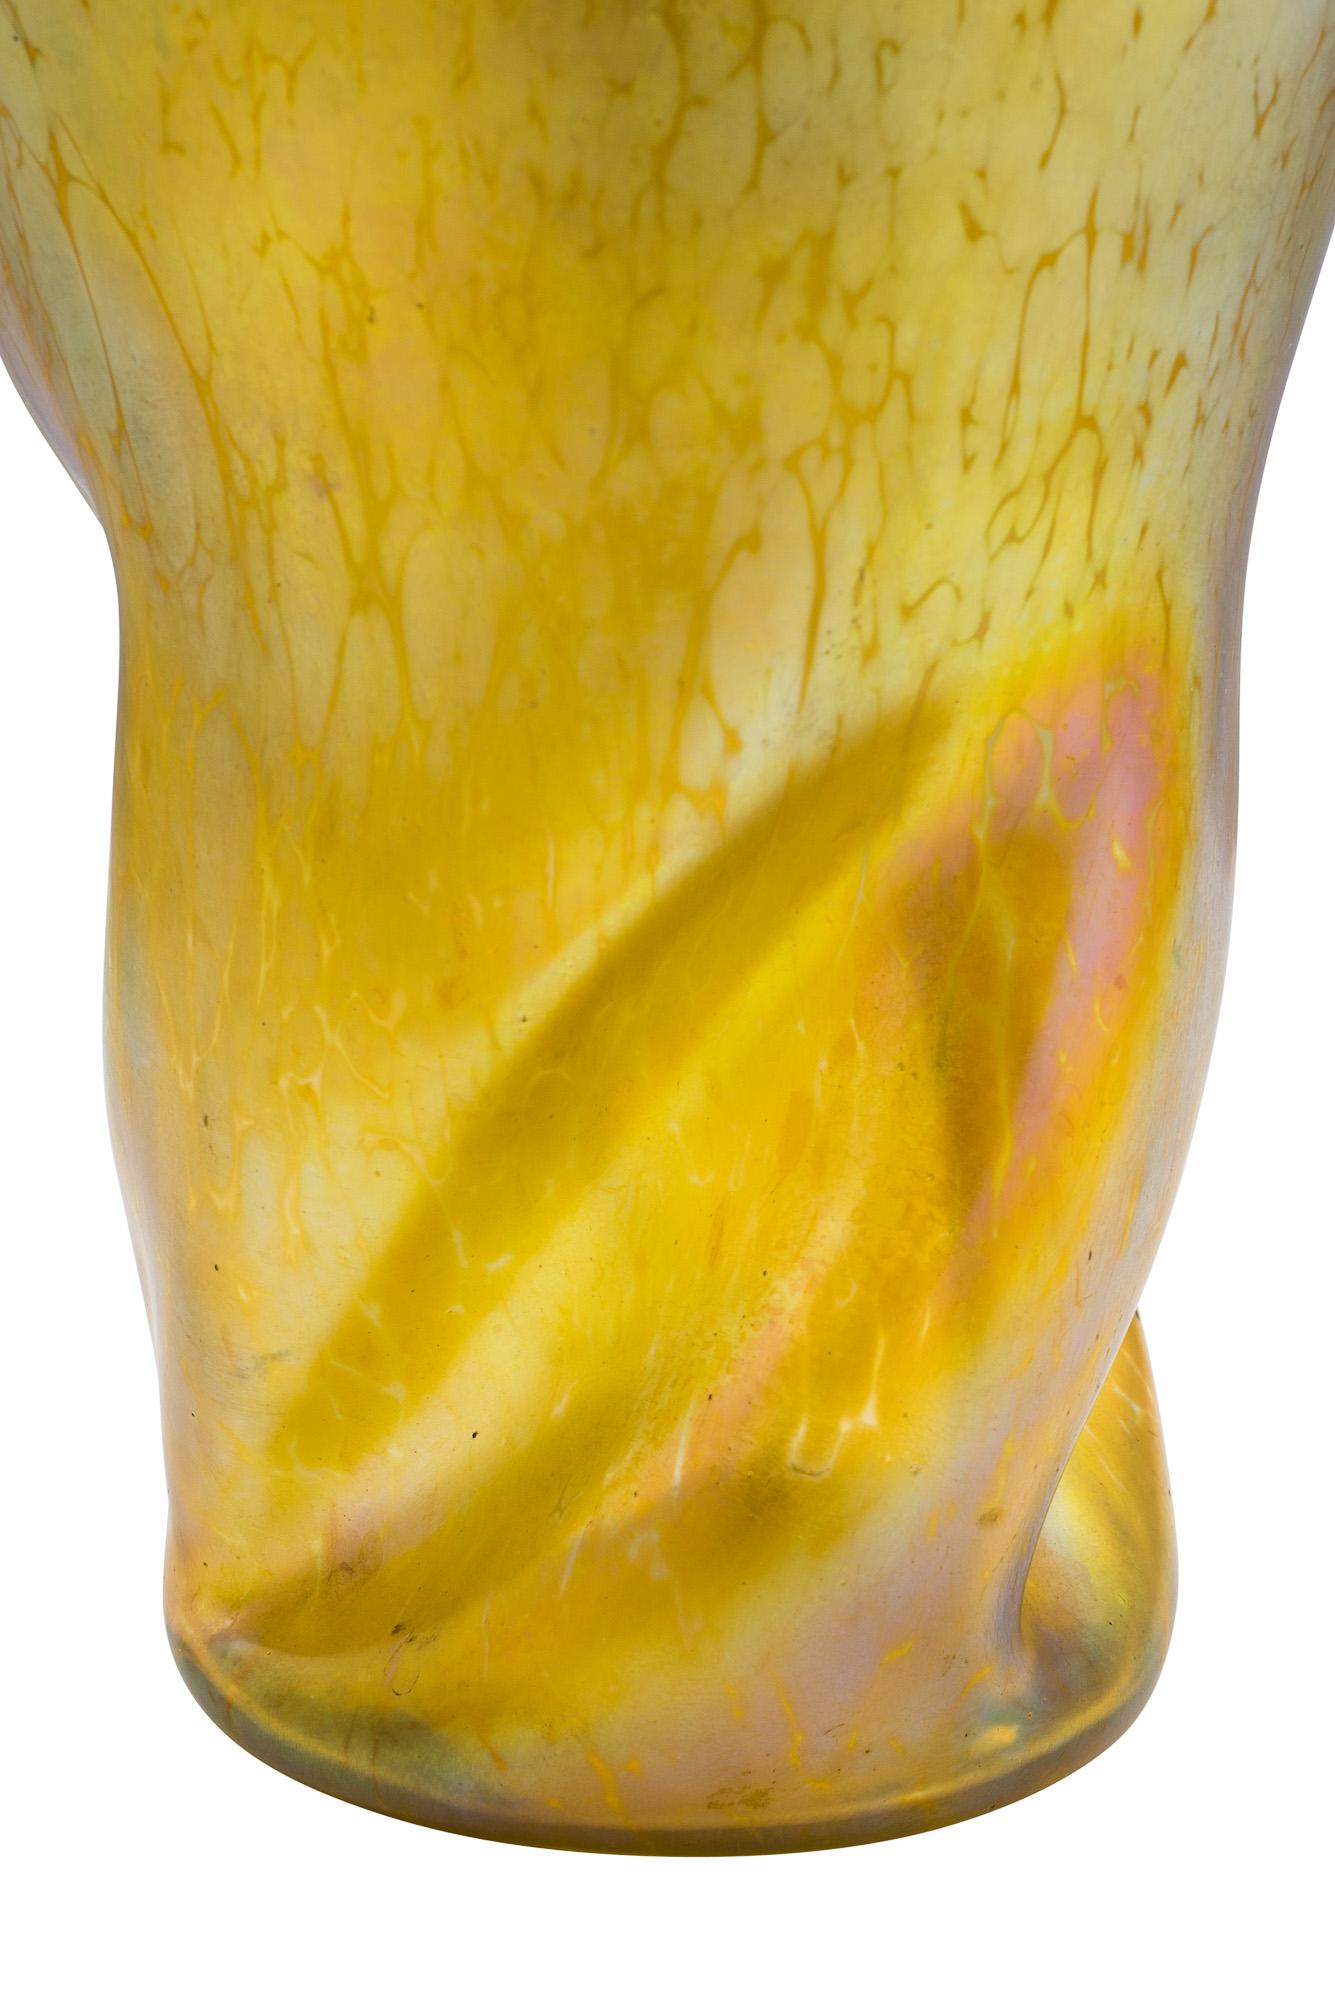 The Papillon decoration was one of the most successful variants by Loetz, circa 1900. Ranging among the less expensive pieces from that time it was produced in many colors and on complex designs. The twisted form of this vase is empowering the